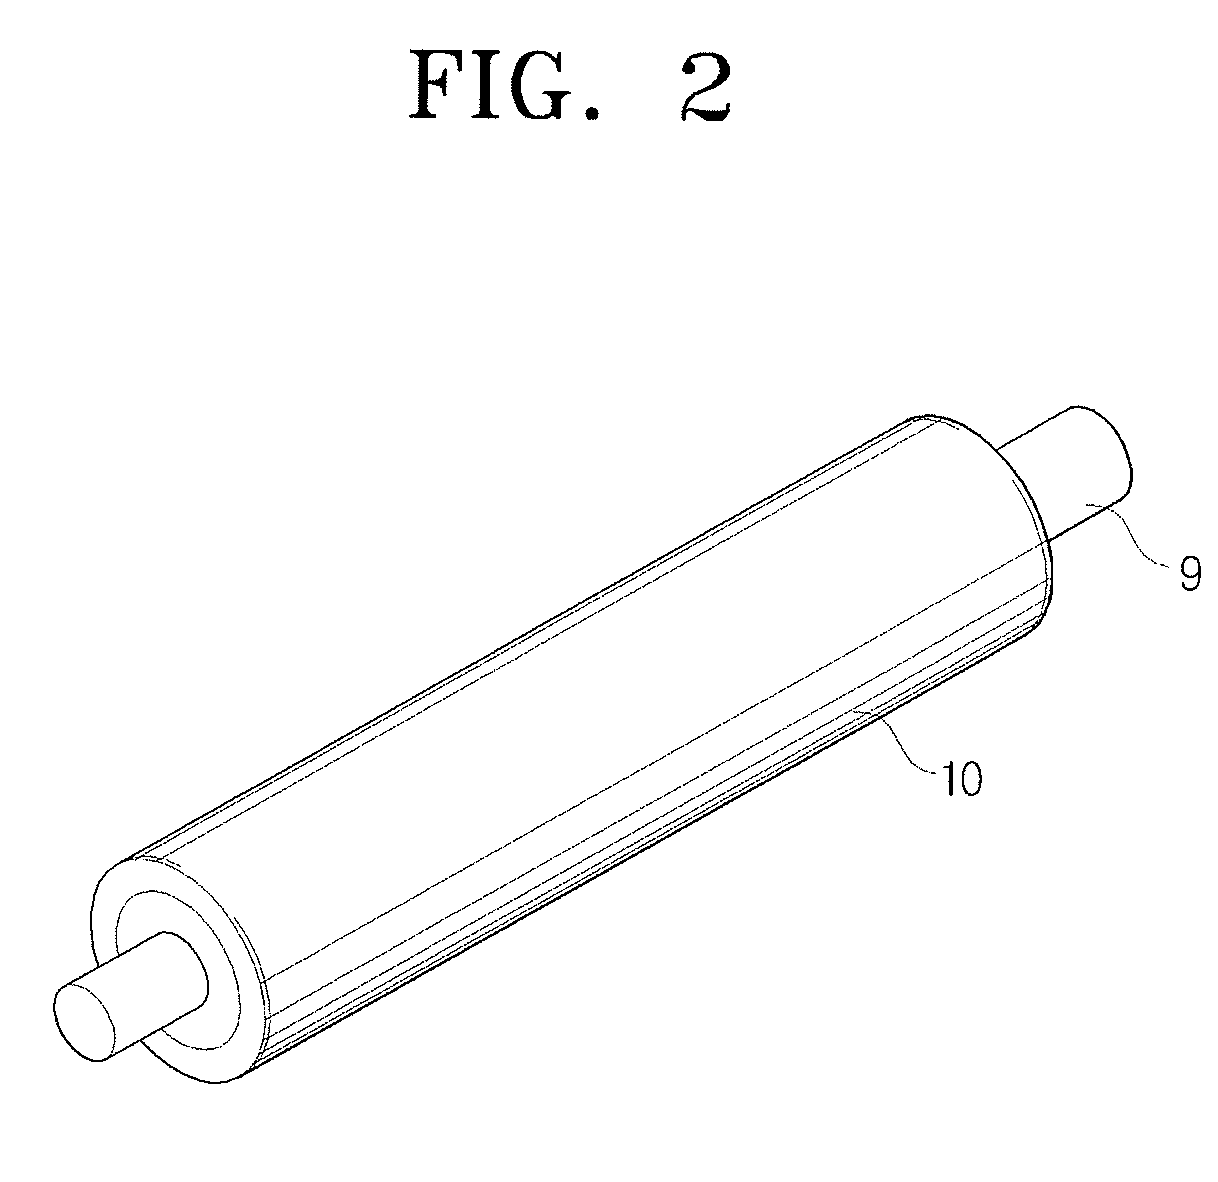 Method to produce conductive transfer roller, transfer roller, and image forming apparatus having the same